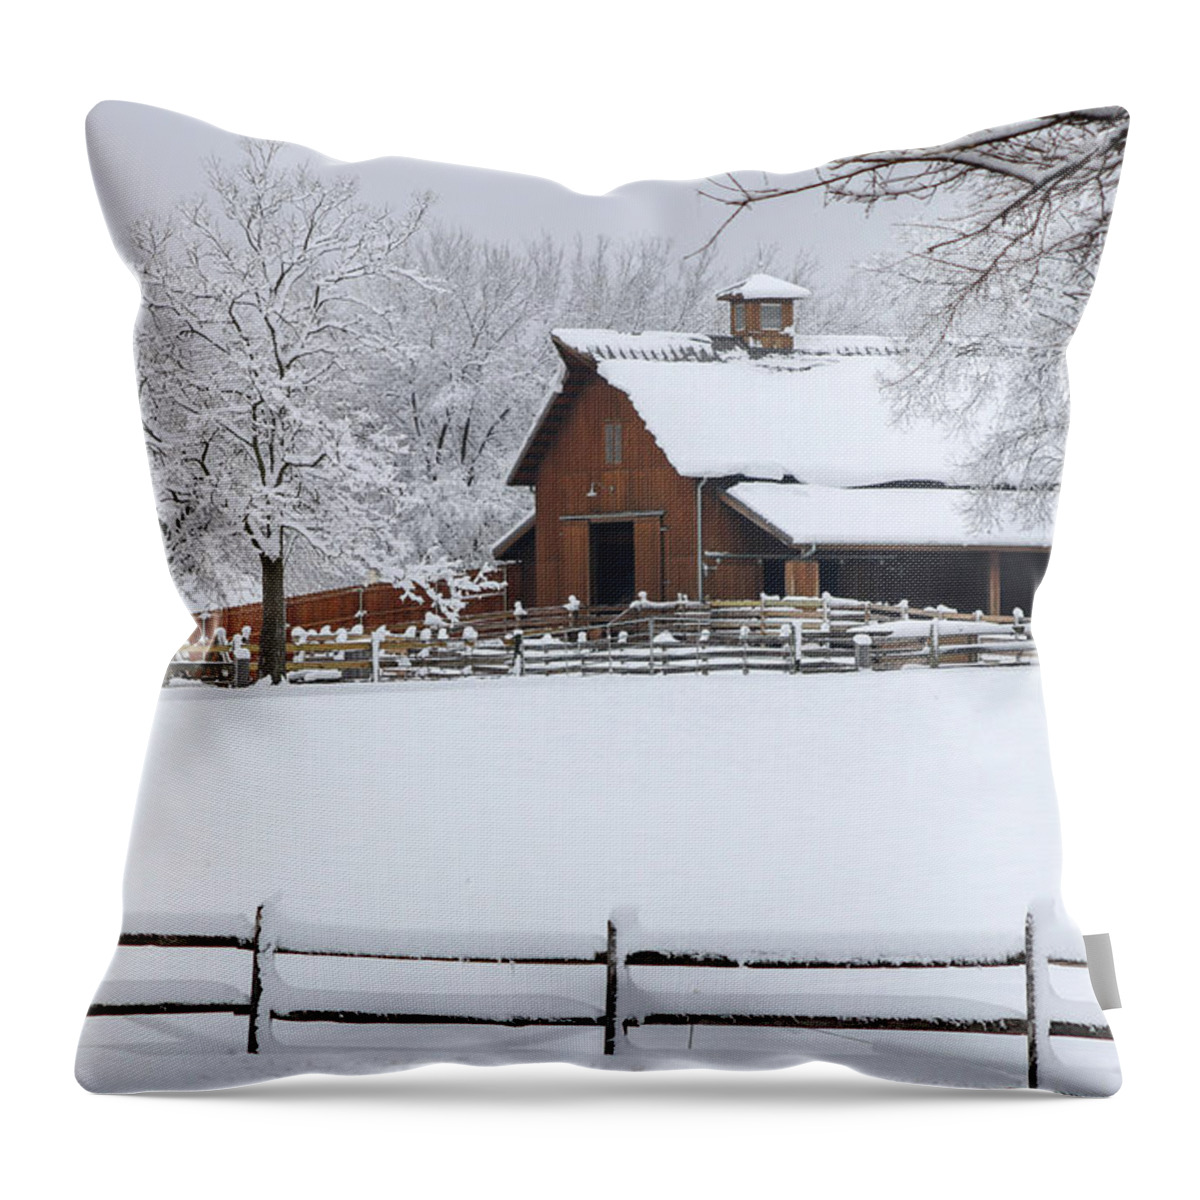 Kansas Throw Pillow featuring the photograph Wintry Barn by Mary Anne Delgado